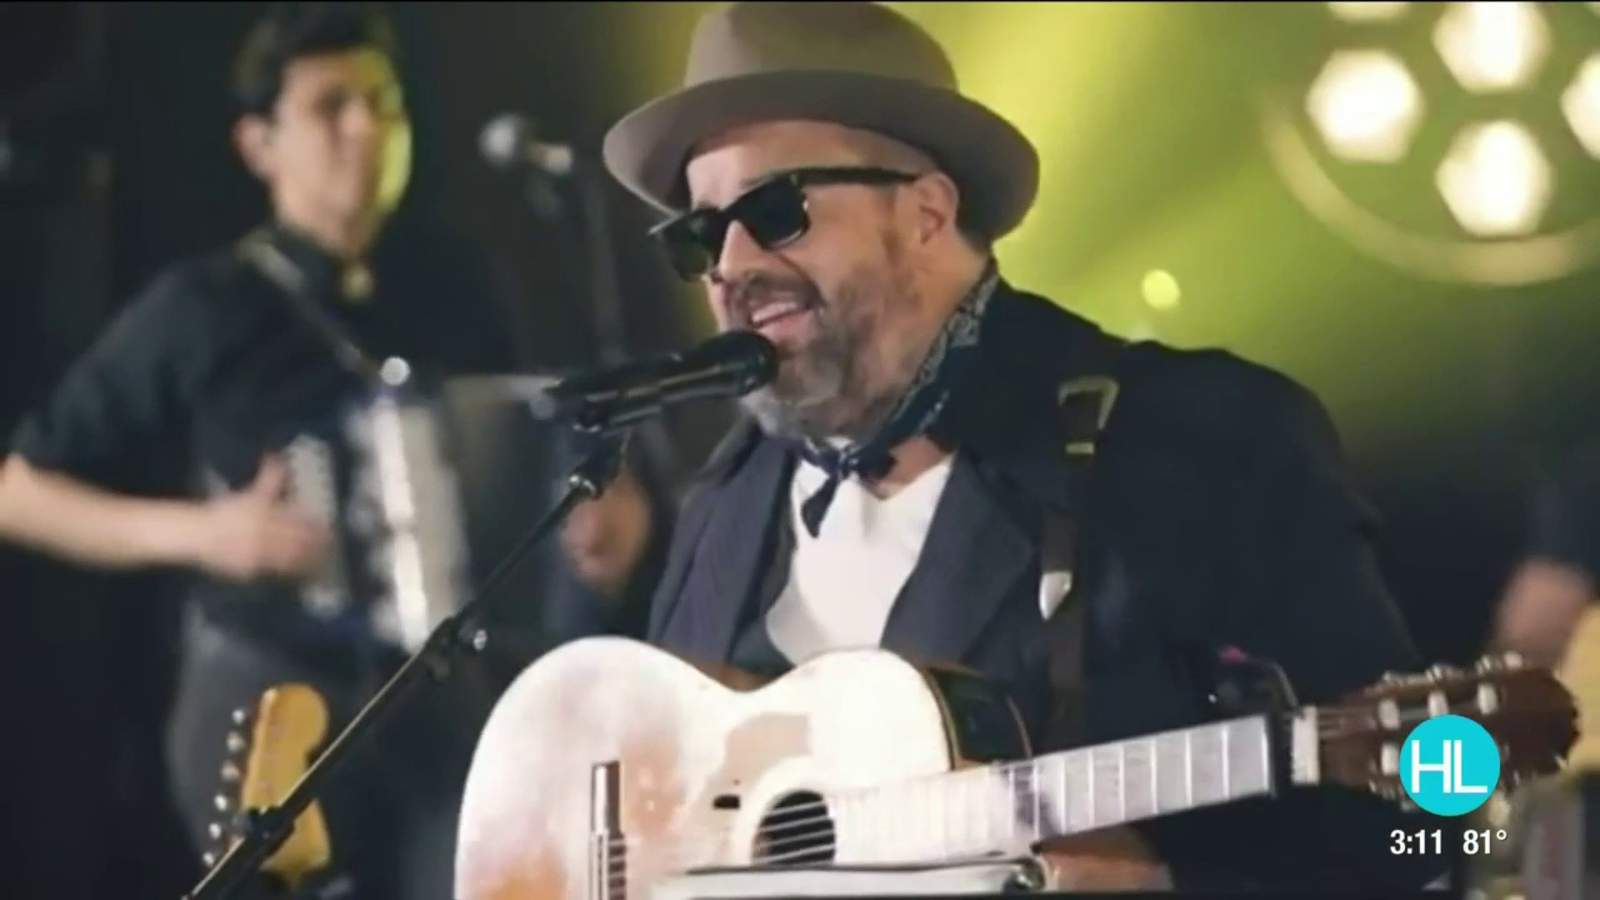 The Mavericks’ Raul Malo embraces his Latin roots on the band’s new album